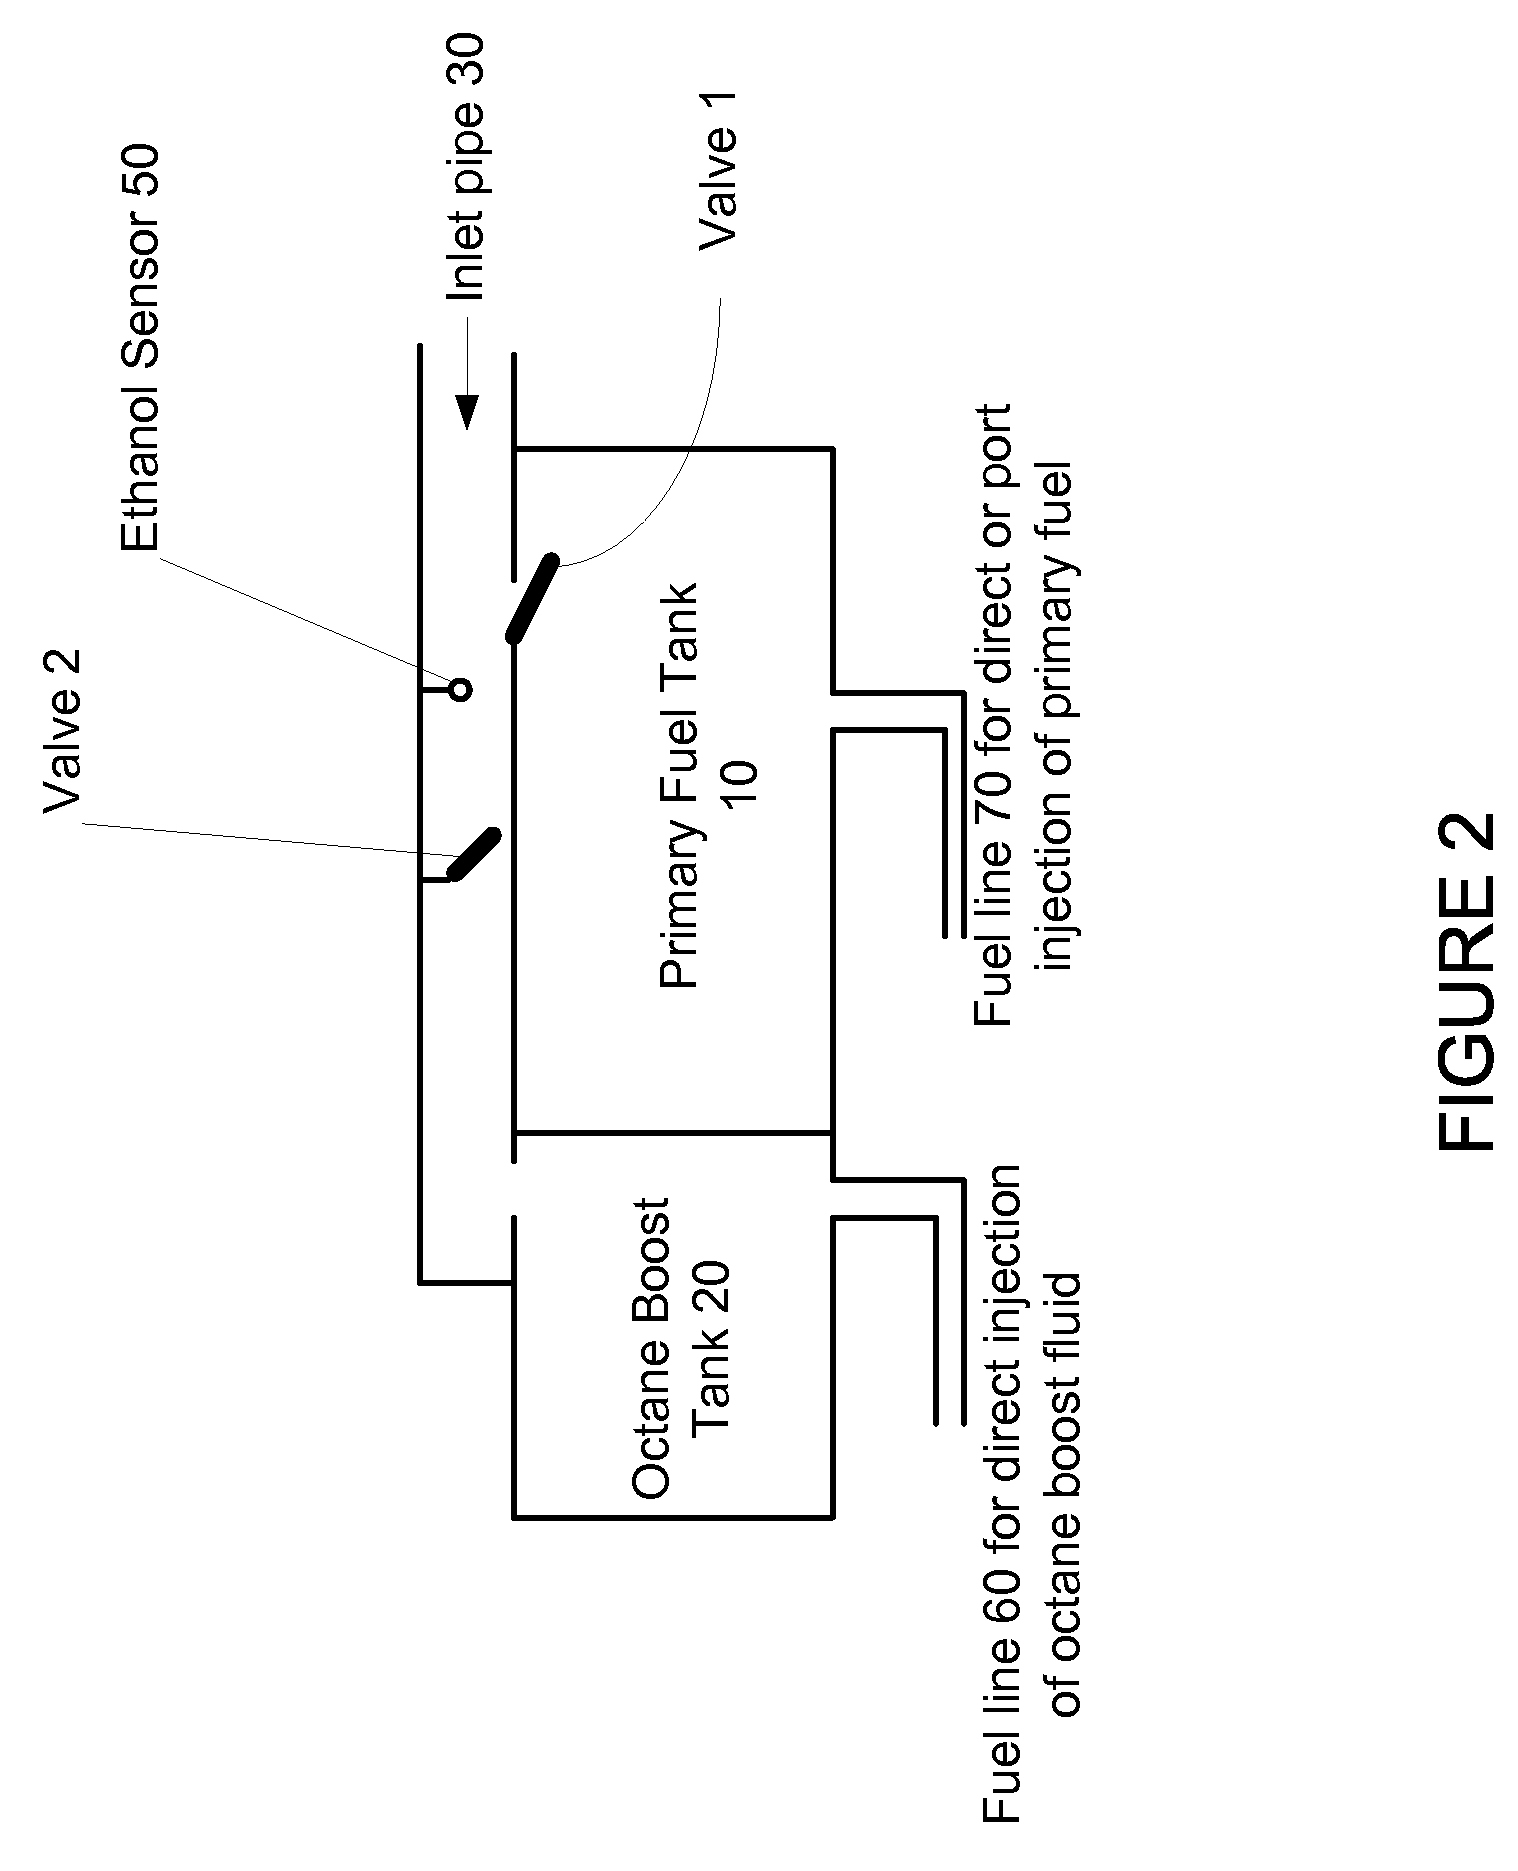 Fuel Tank System For Gasoline And Flexible Ethanol Powered Vehicles Using On-Demand Direct Ethanol Injection Octane Boost